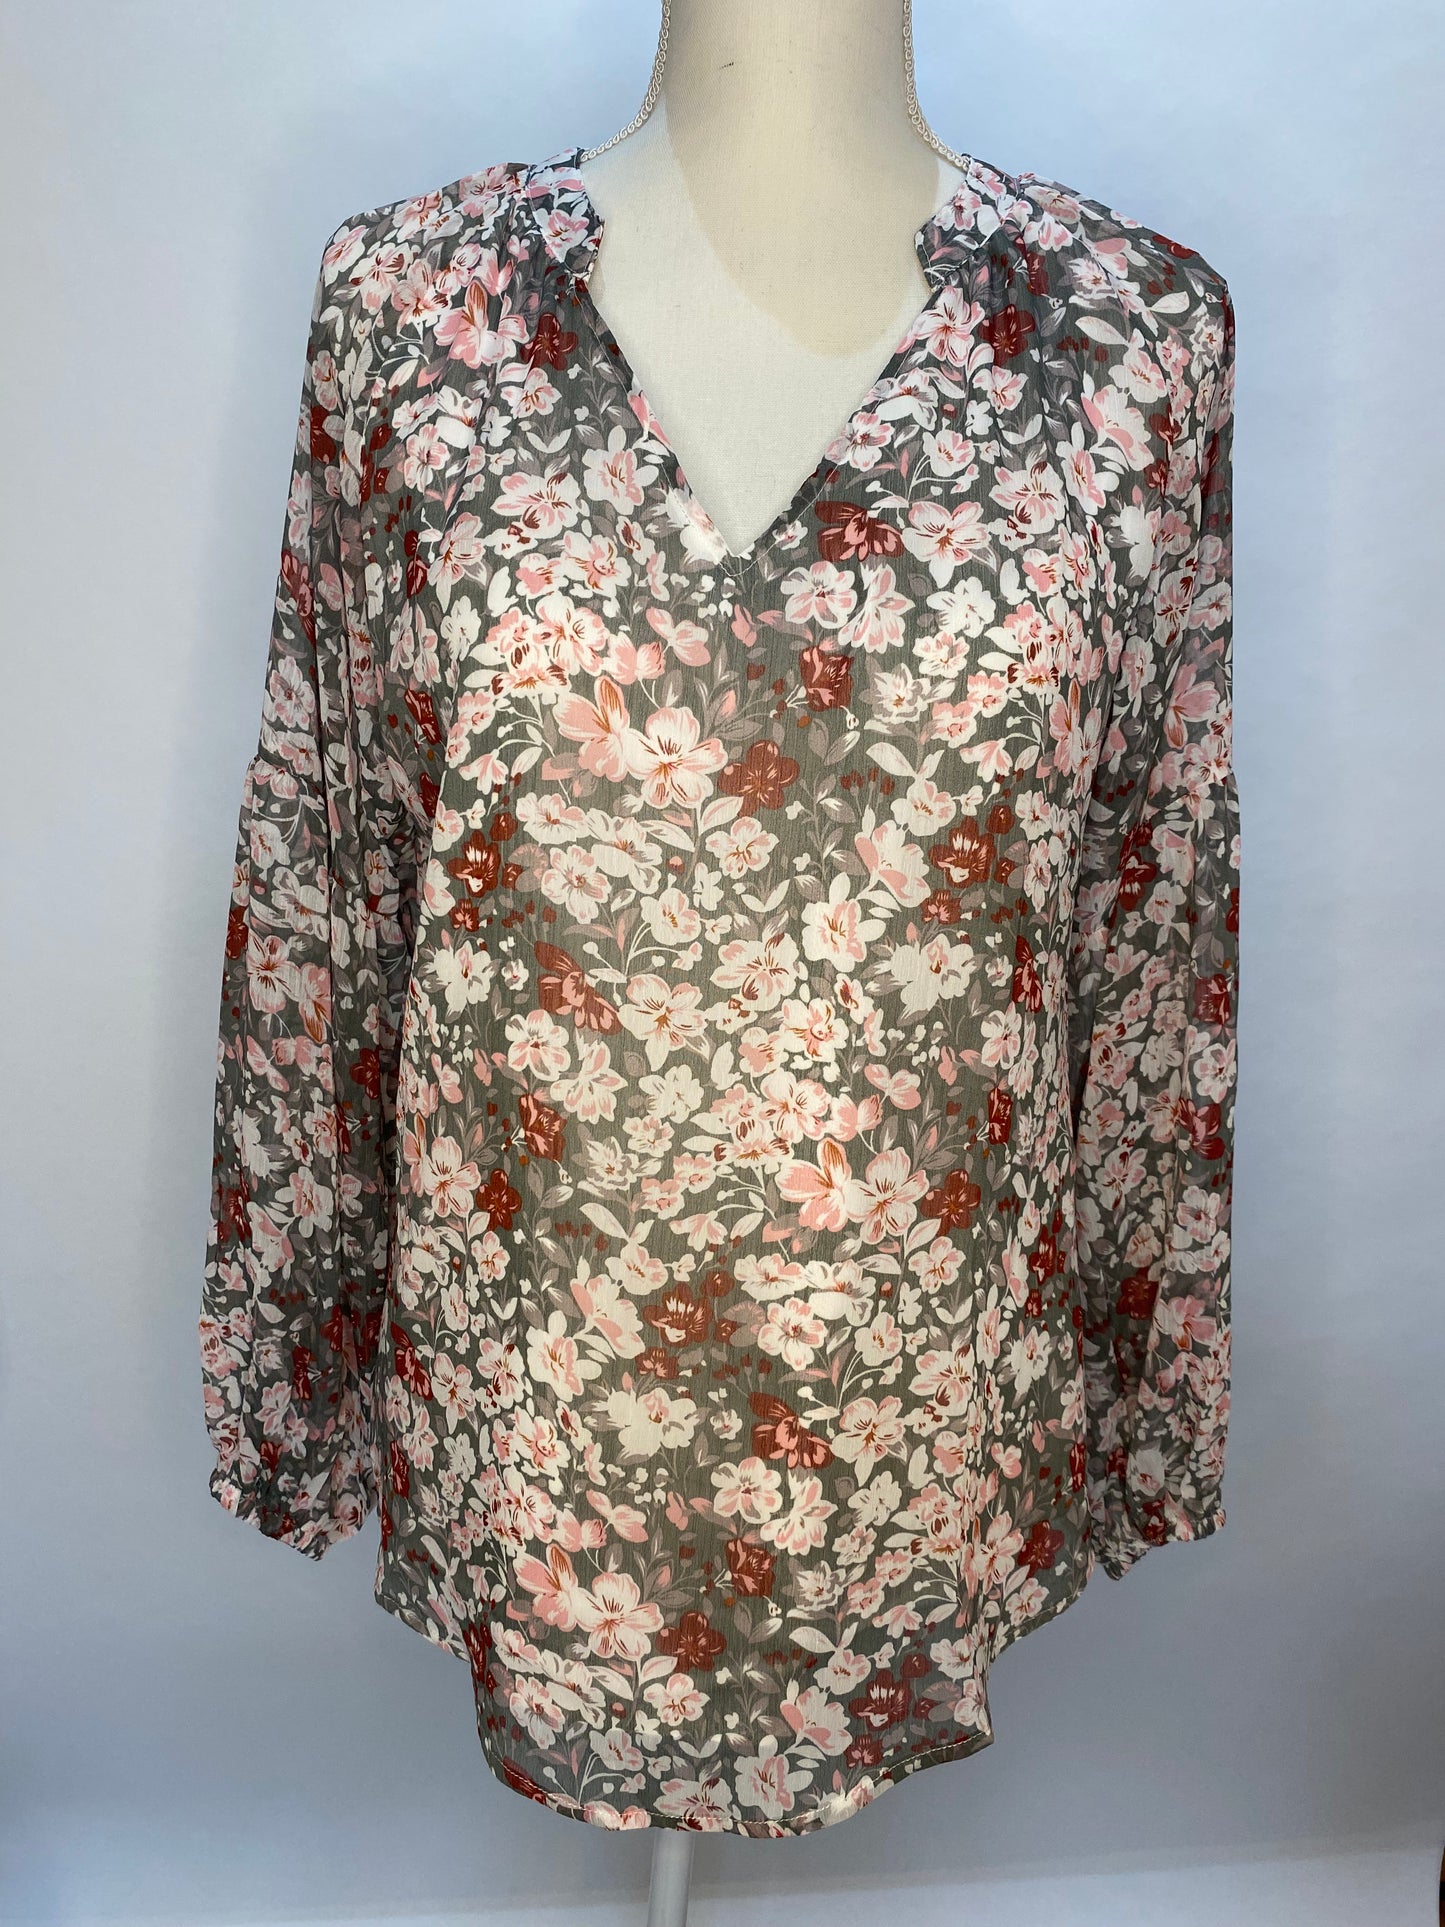 The Blossom Floral Print Top